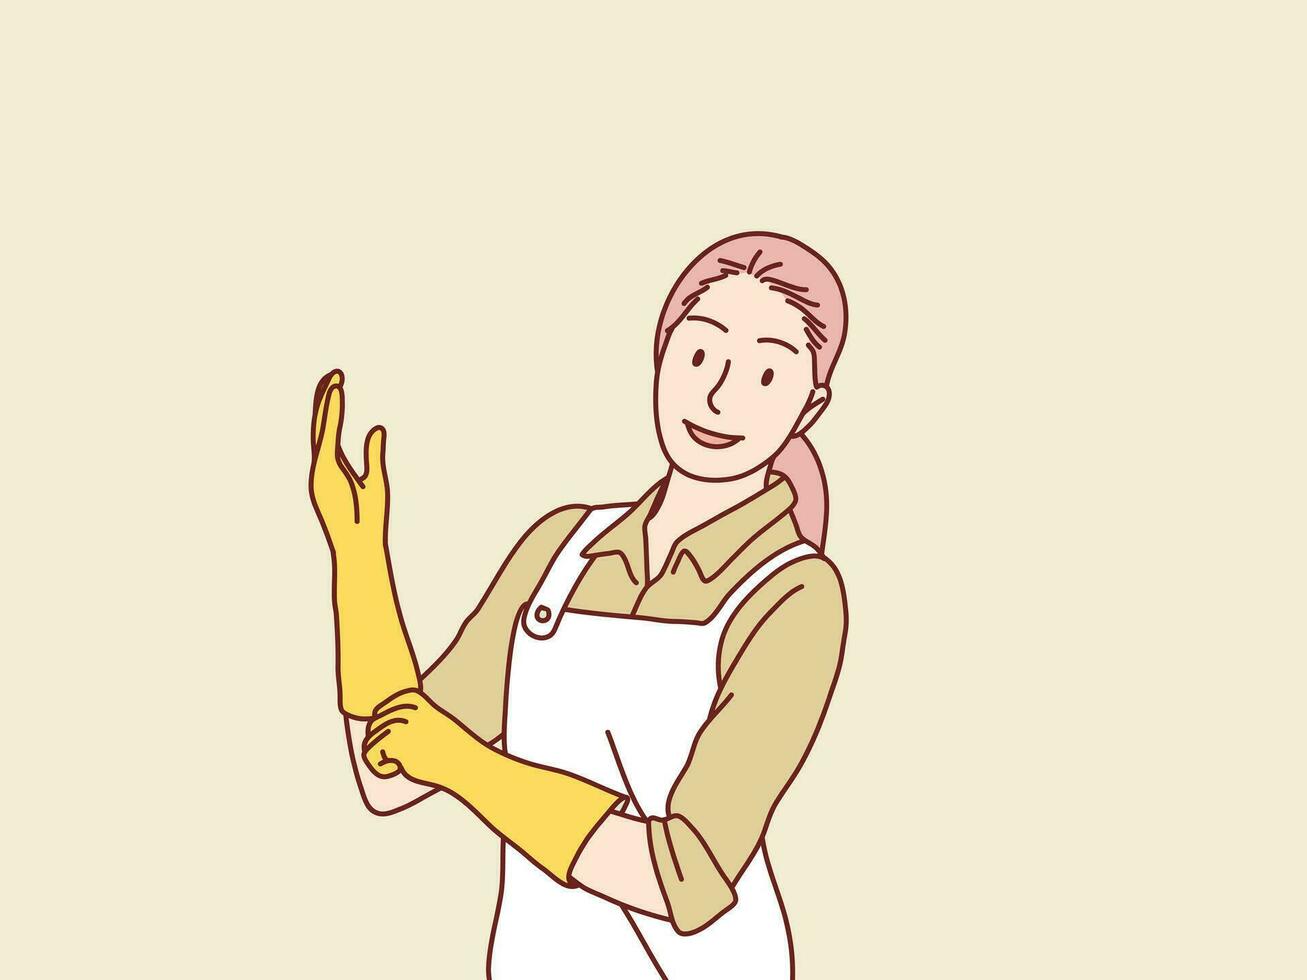 Mom ready to cleaning works with rubber gloves simple korean style illustration vector